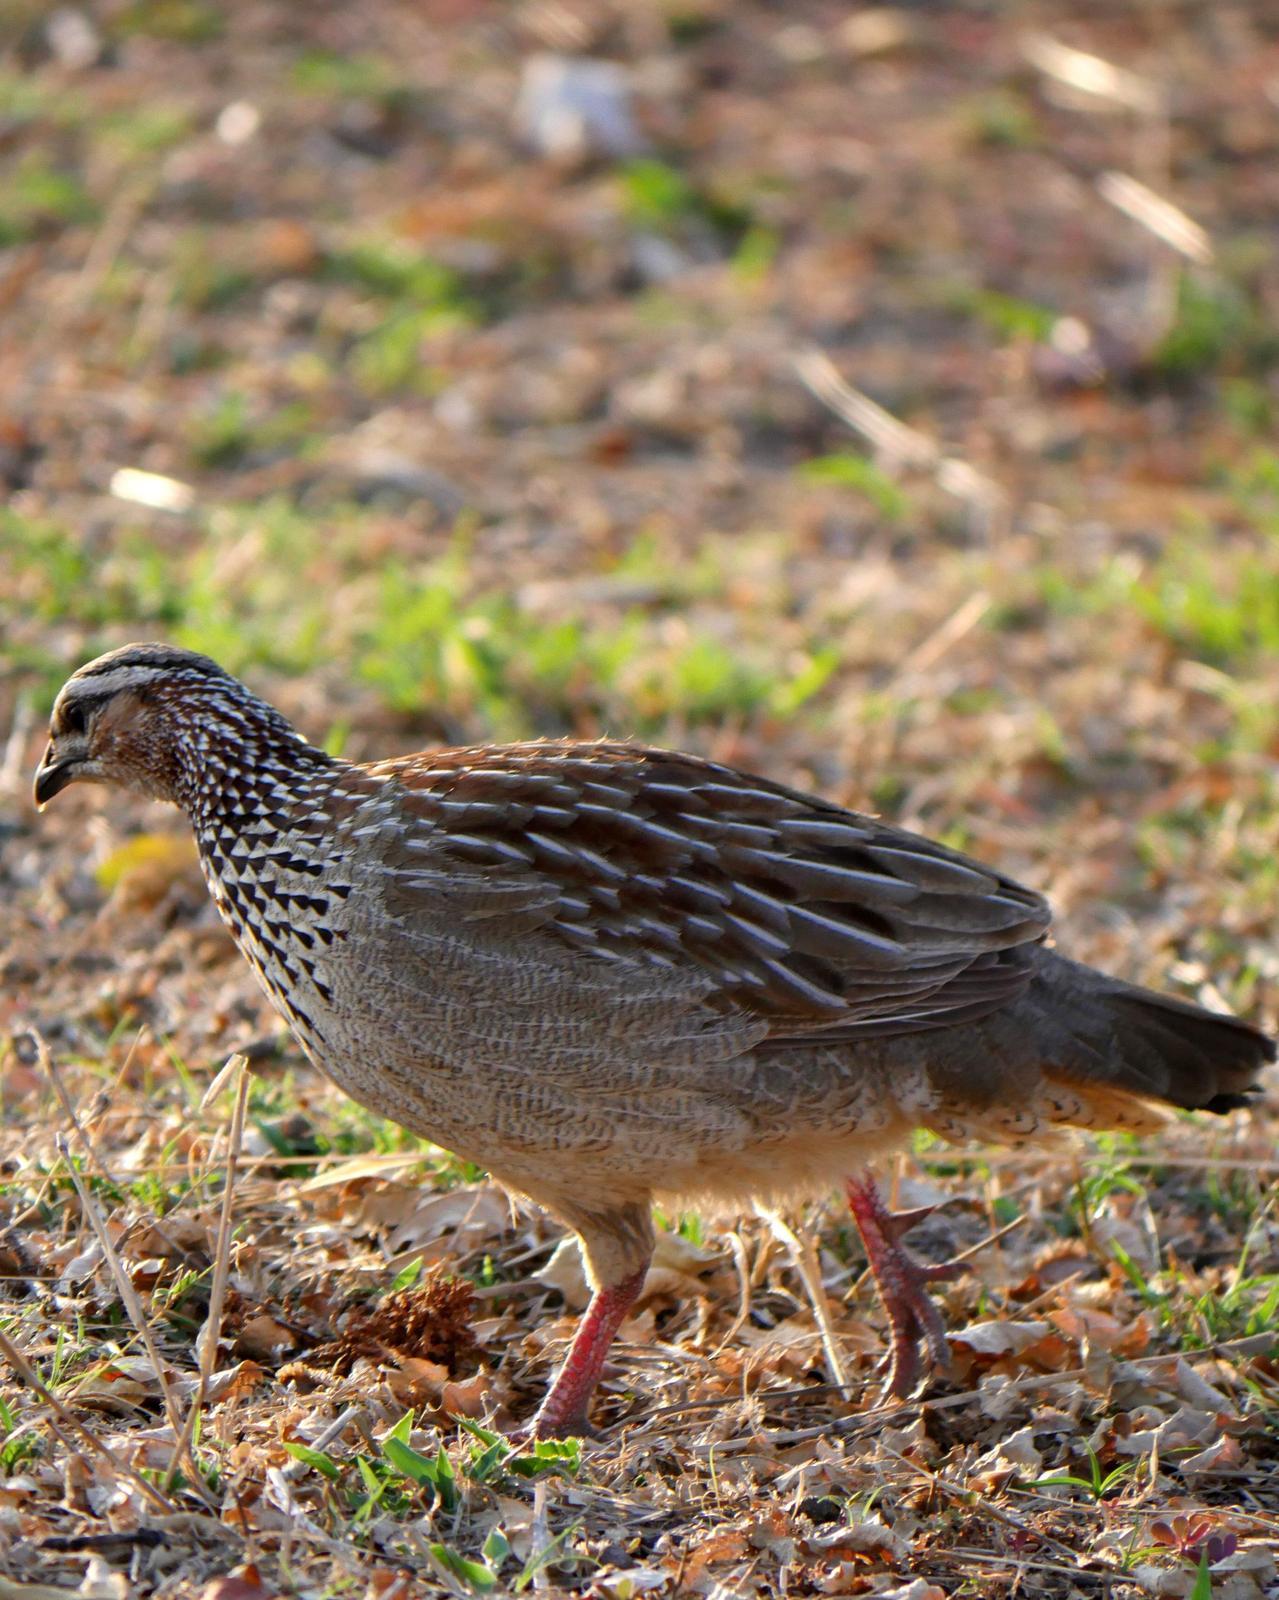 Crested Francolin Photo by Peter Lowe